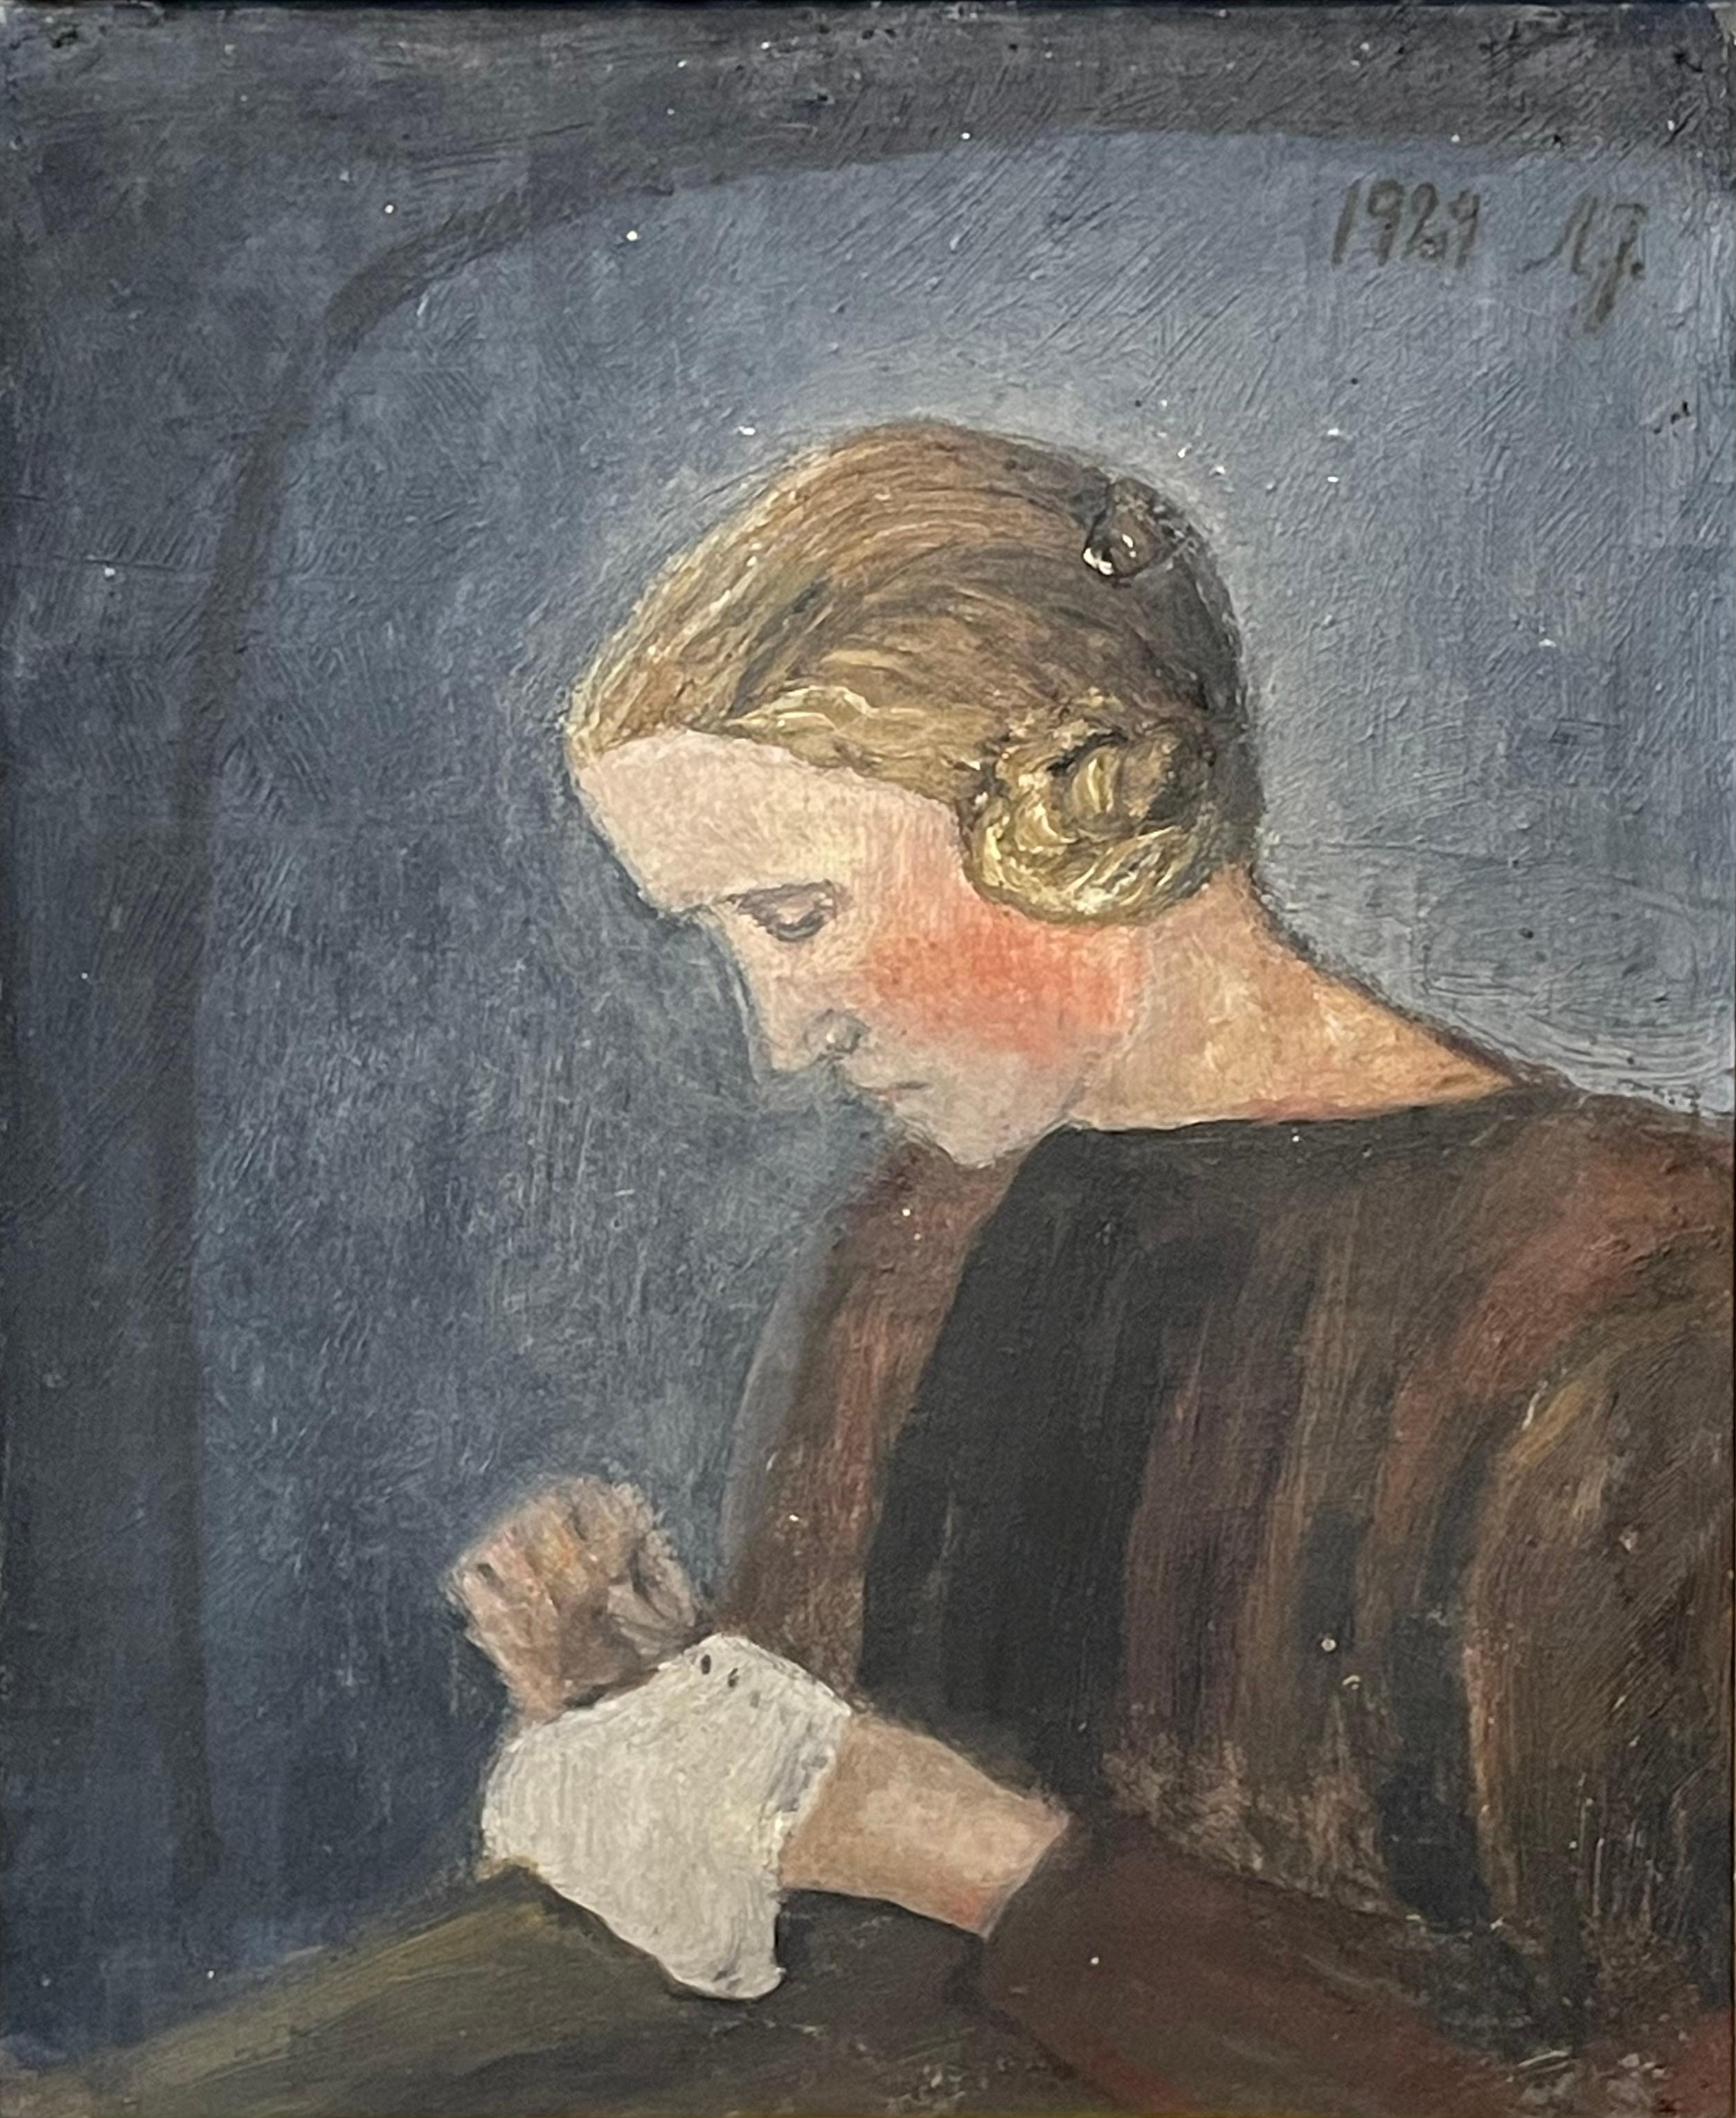 This is an original 1929 oil on plate painting from Denmark. The motive is a woman doing needlework in a dark setting.

The painting is signed and dated by the artist. It is framed in a solid gold painted wooden frame.

Signs of age:
Few spots of